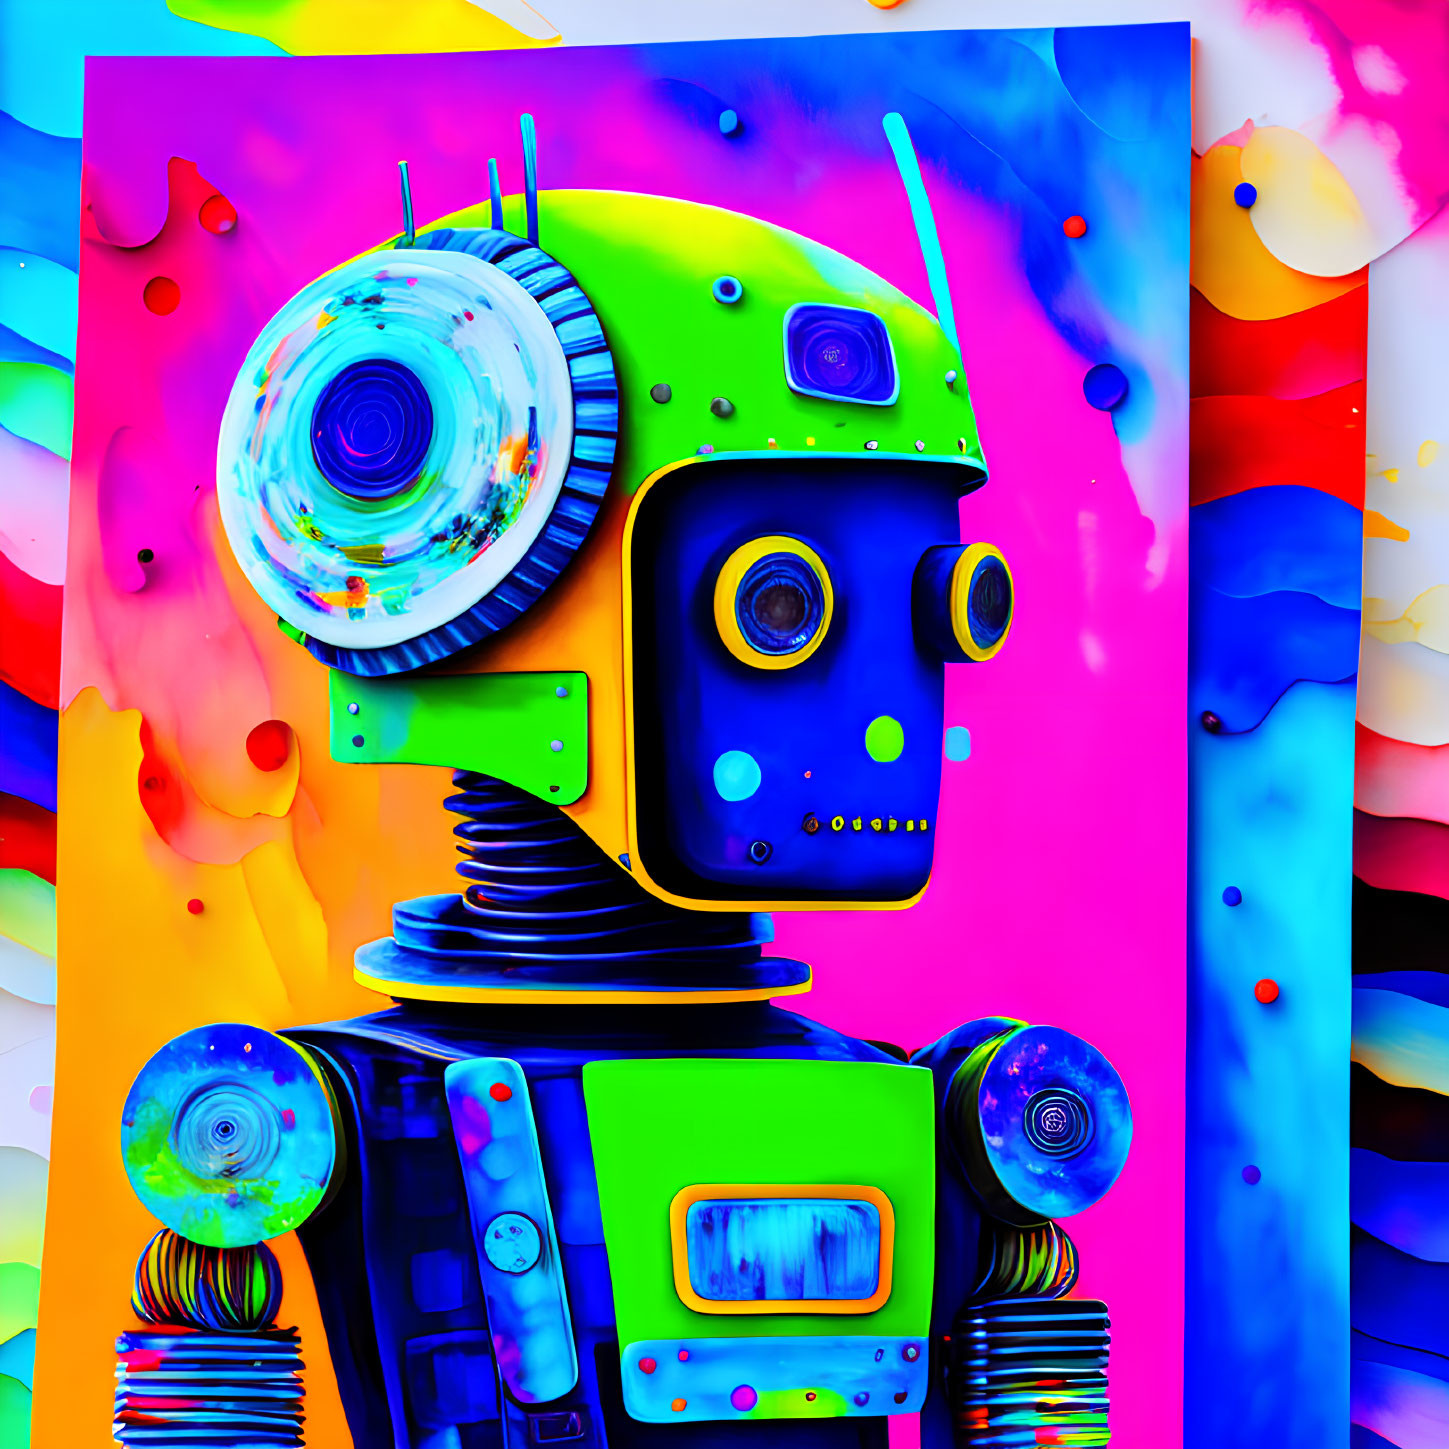 Vibrant stylized robot with round head and antenna on colorful background